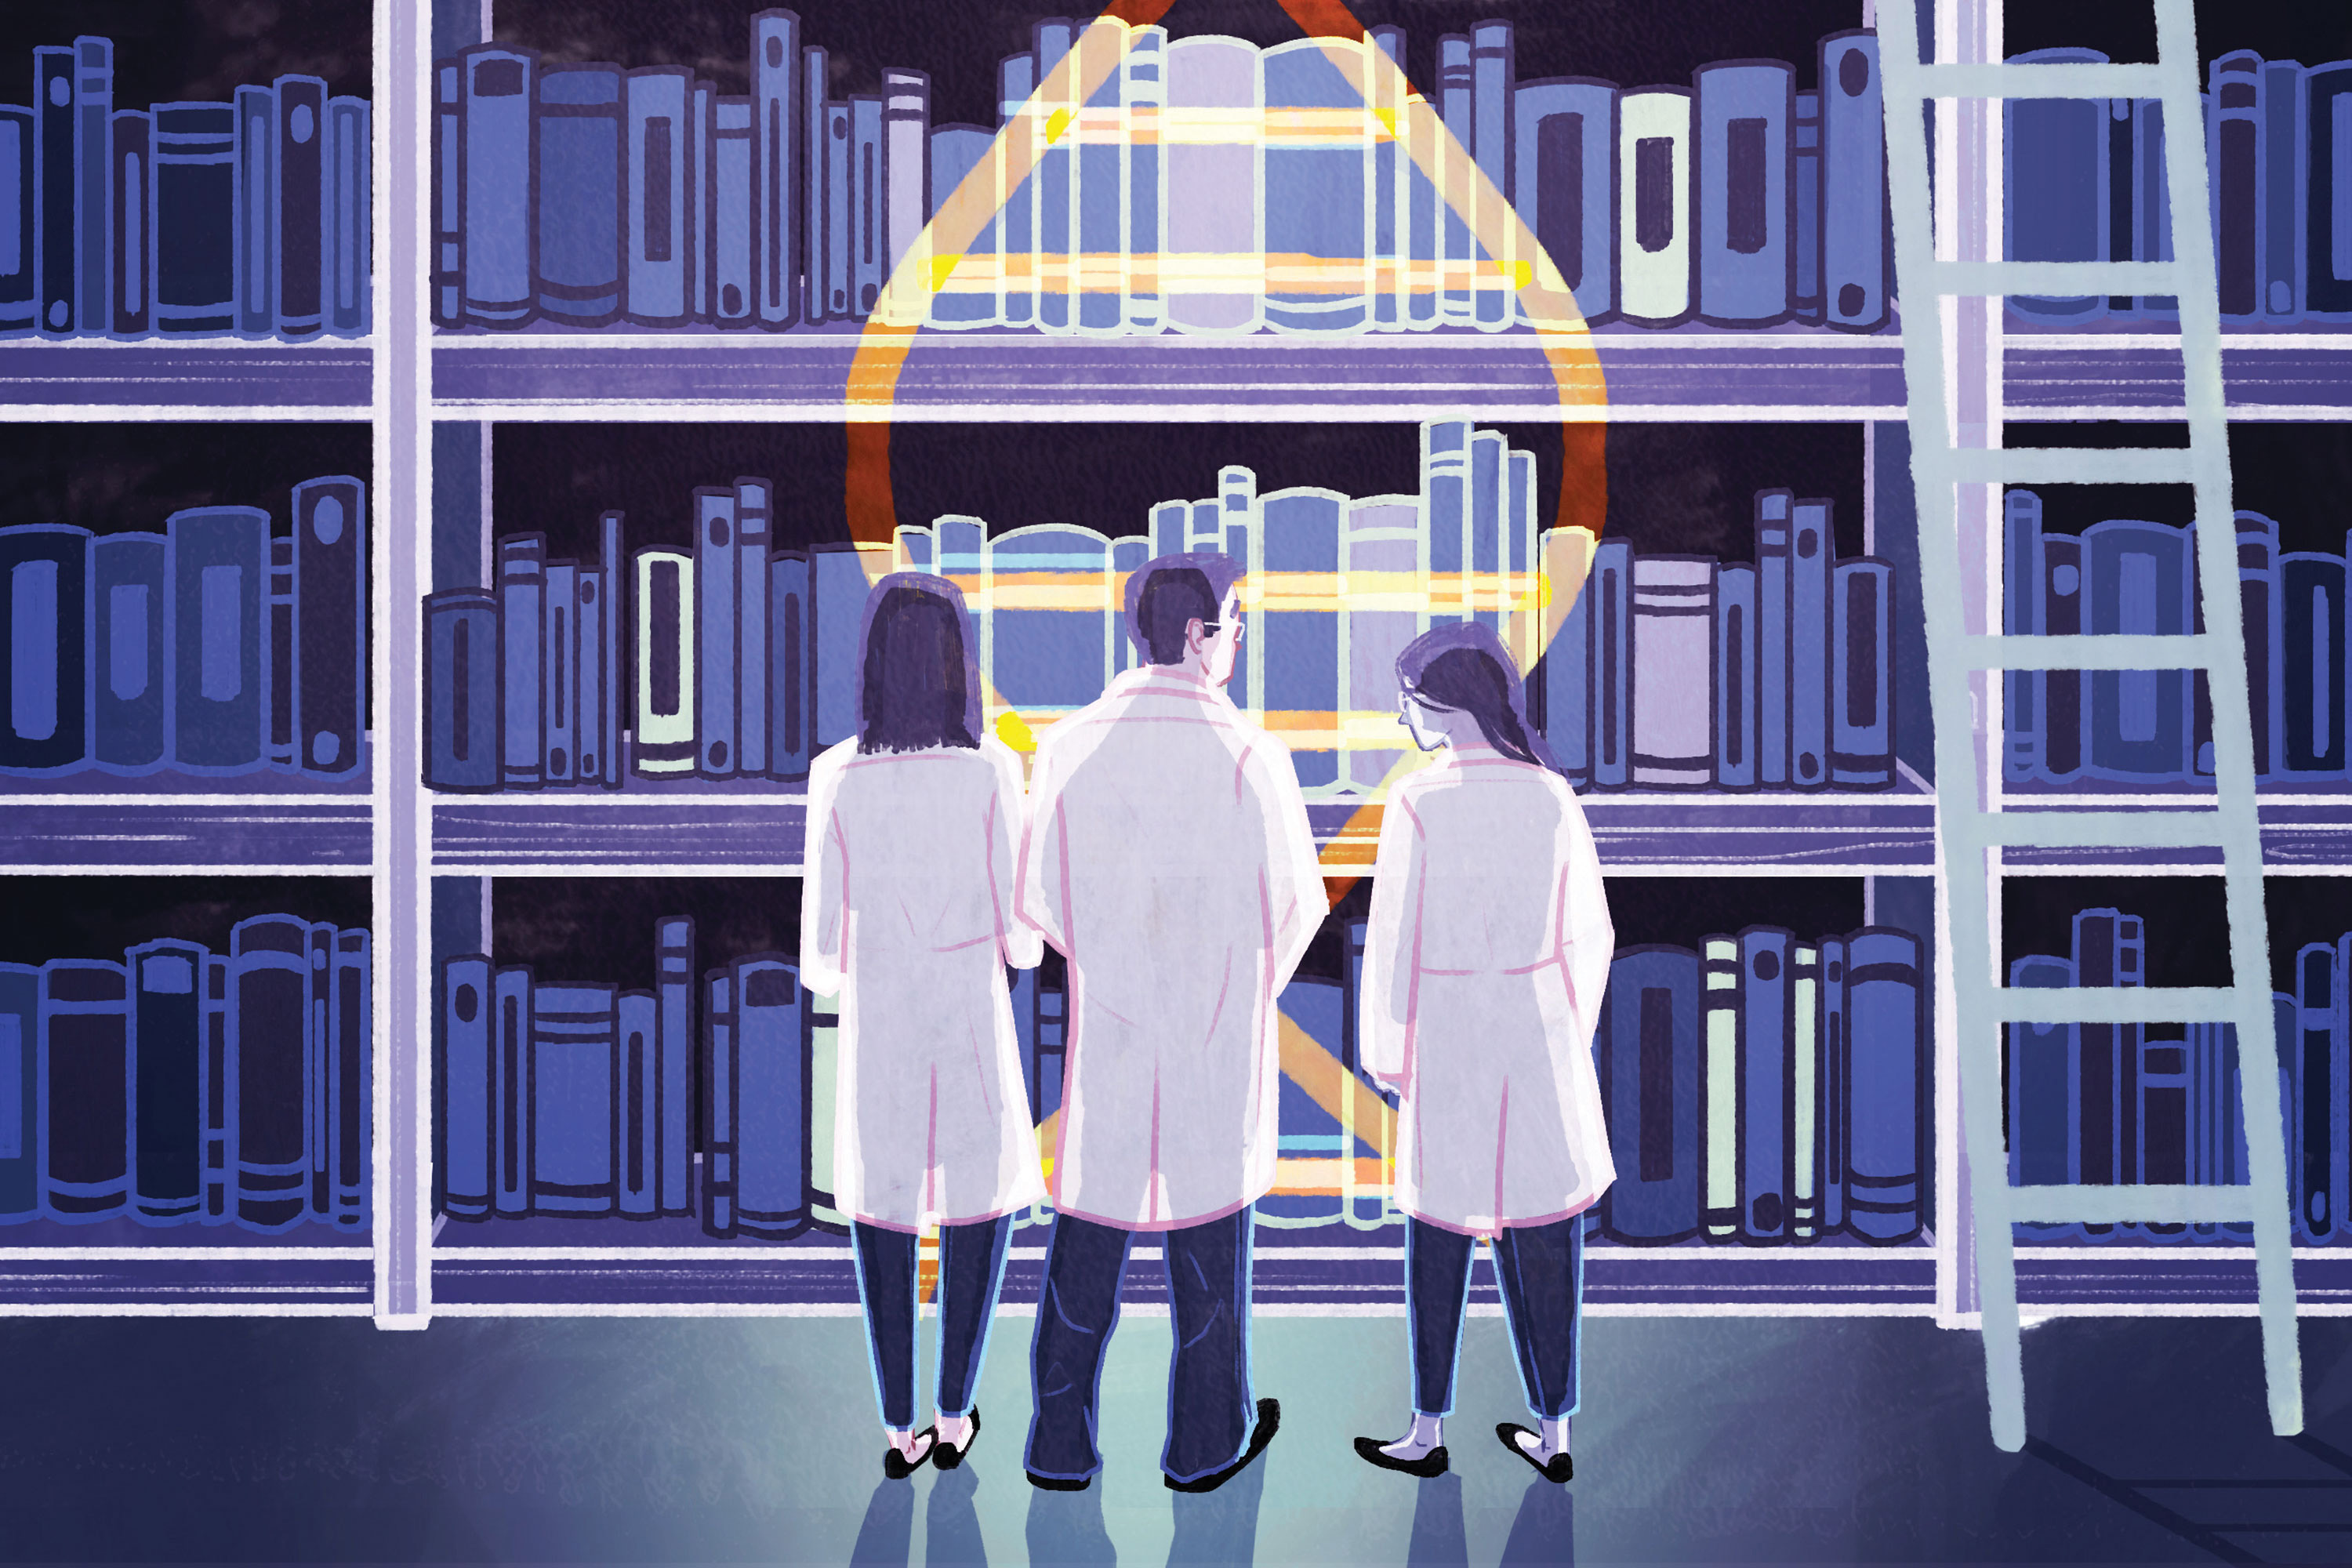 A special team of medical literature experts are on the hunt for cancer's kryptonite, one mutation at a time. (Kailey Whitman Illustration for UConn)